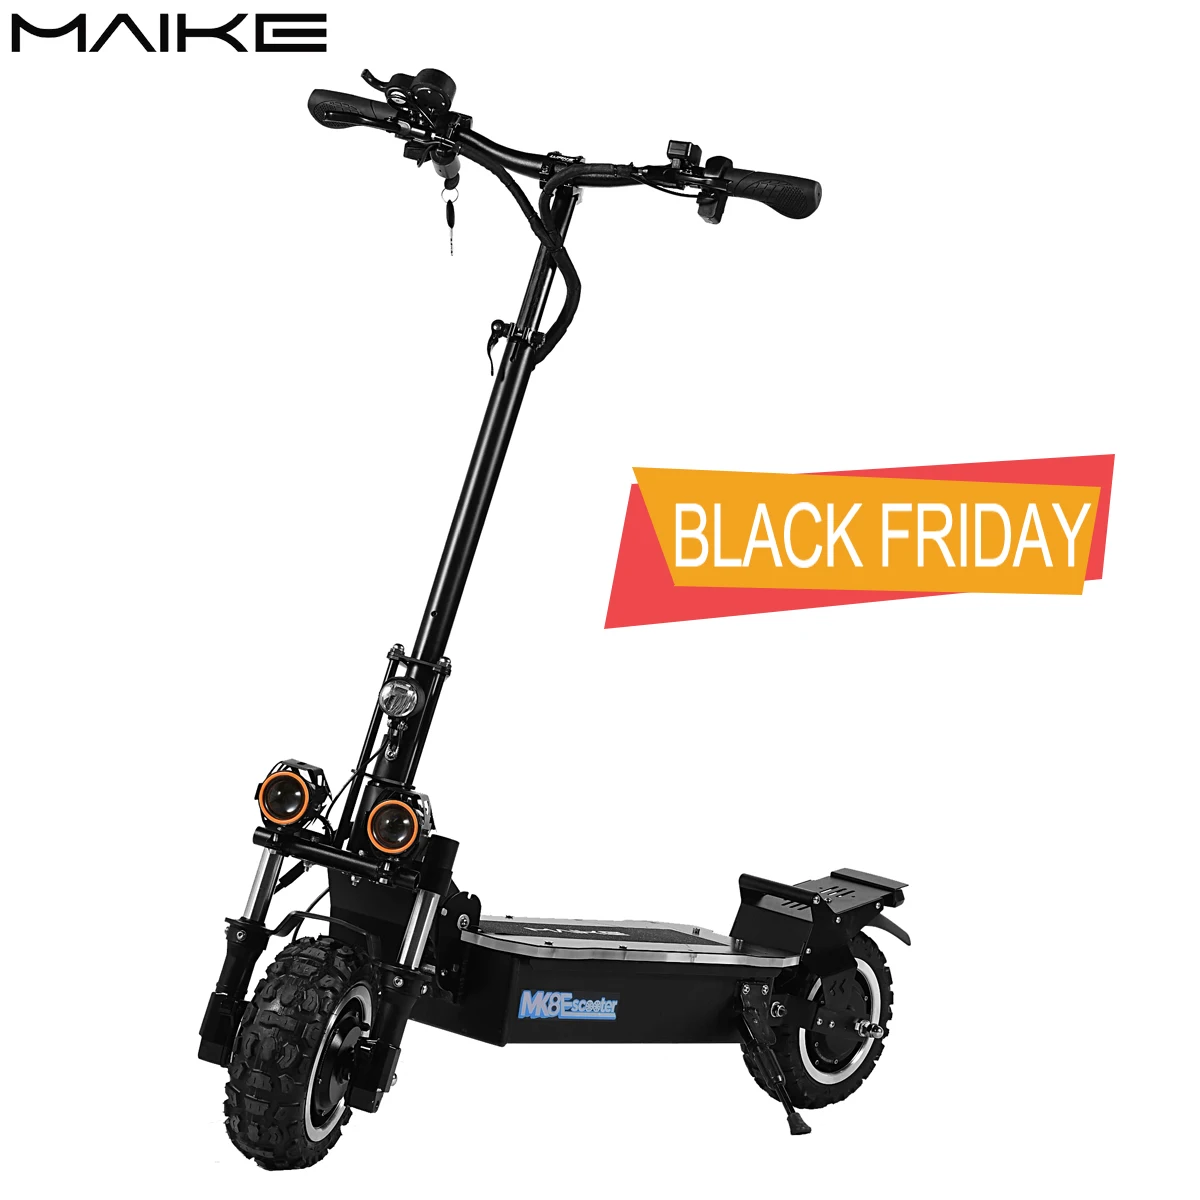 

Hot Maike mk8 60v high speed 5000w dual motor e scooter 11 inch big wheel off road OEM dropship electric scooter two wheel